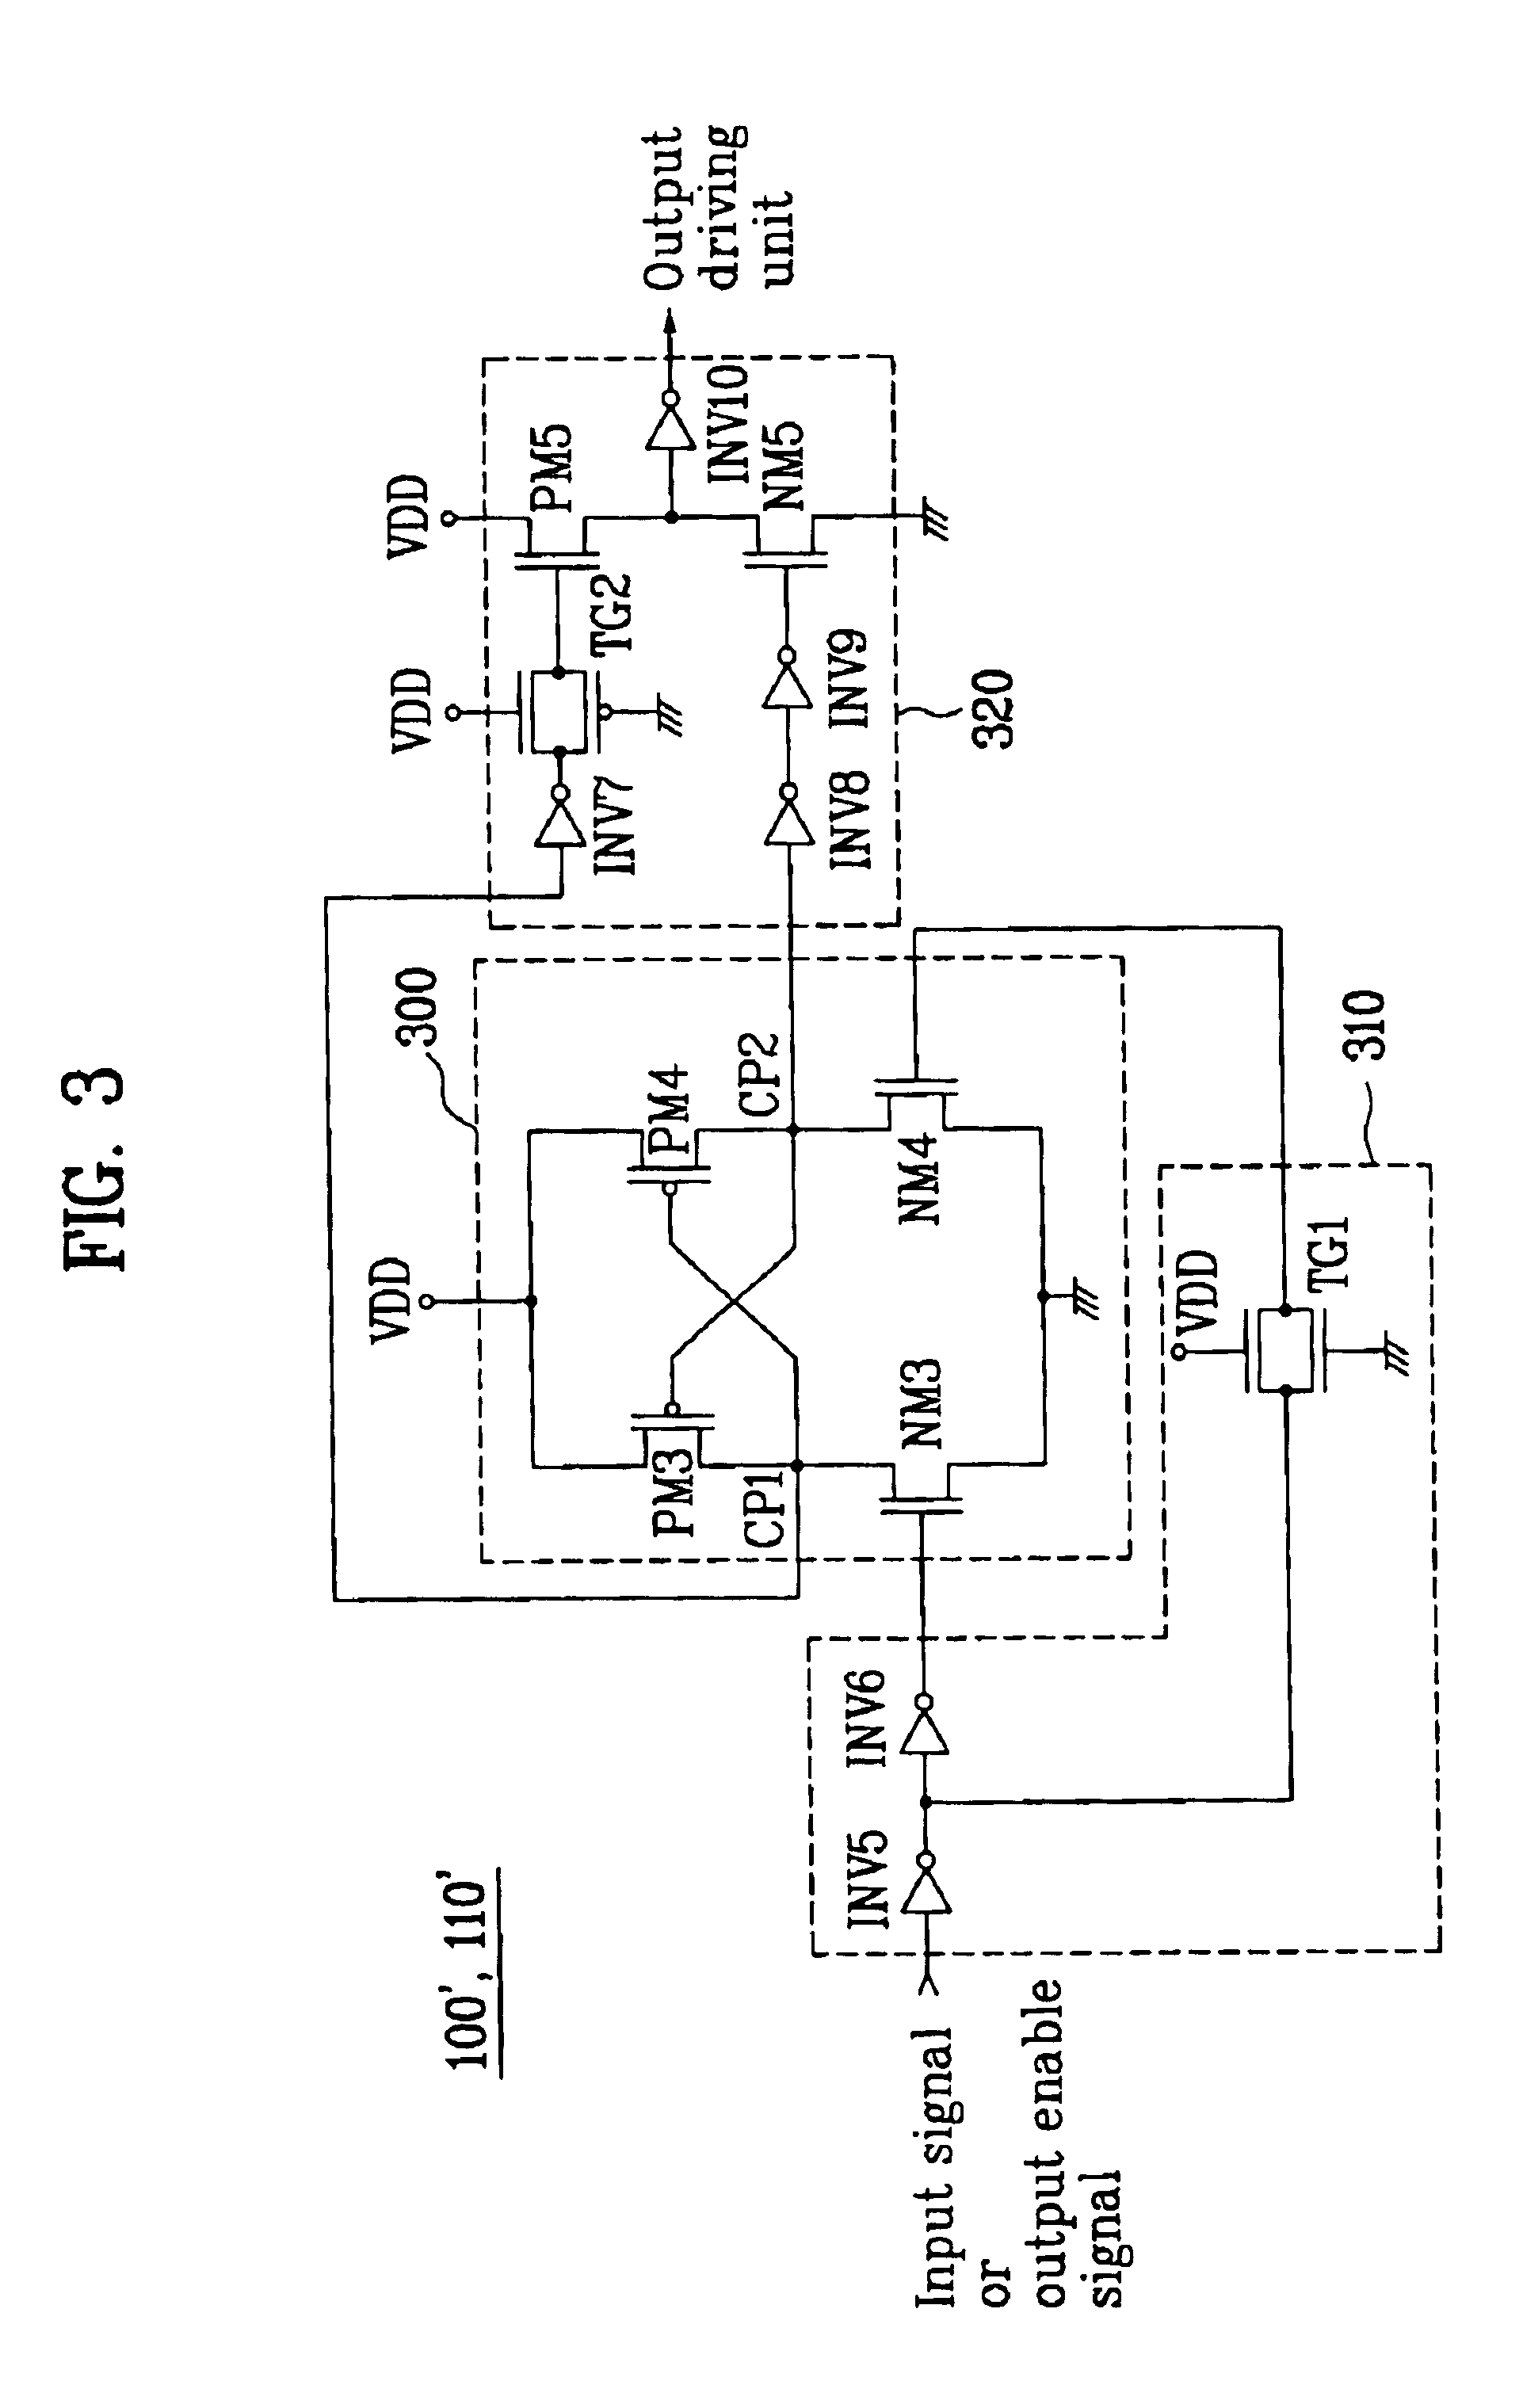 Output driving circuit for maintaining I/O signal duty ratios